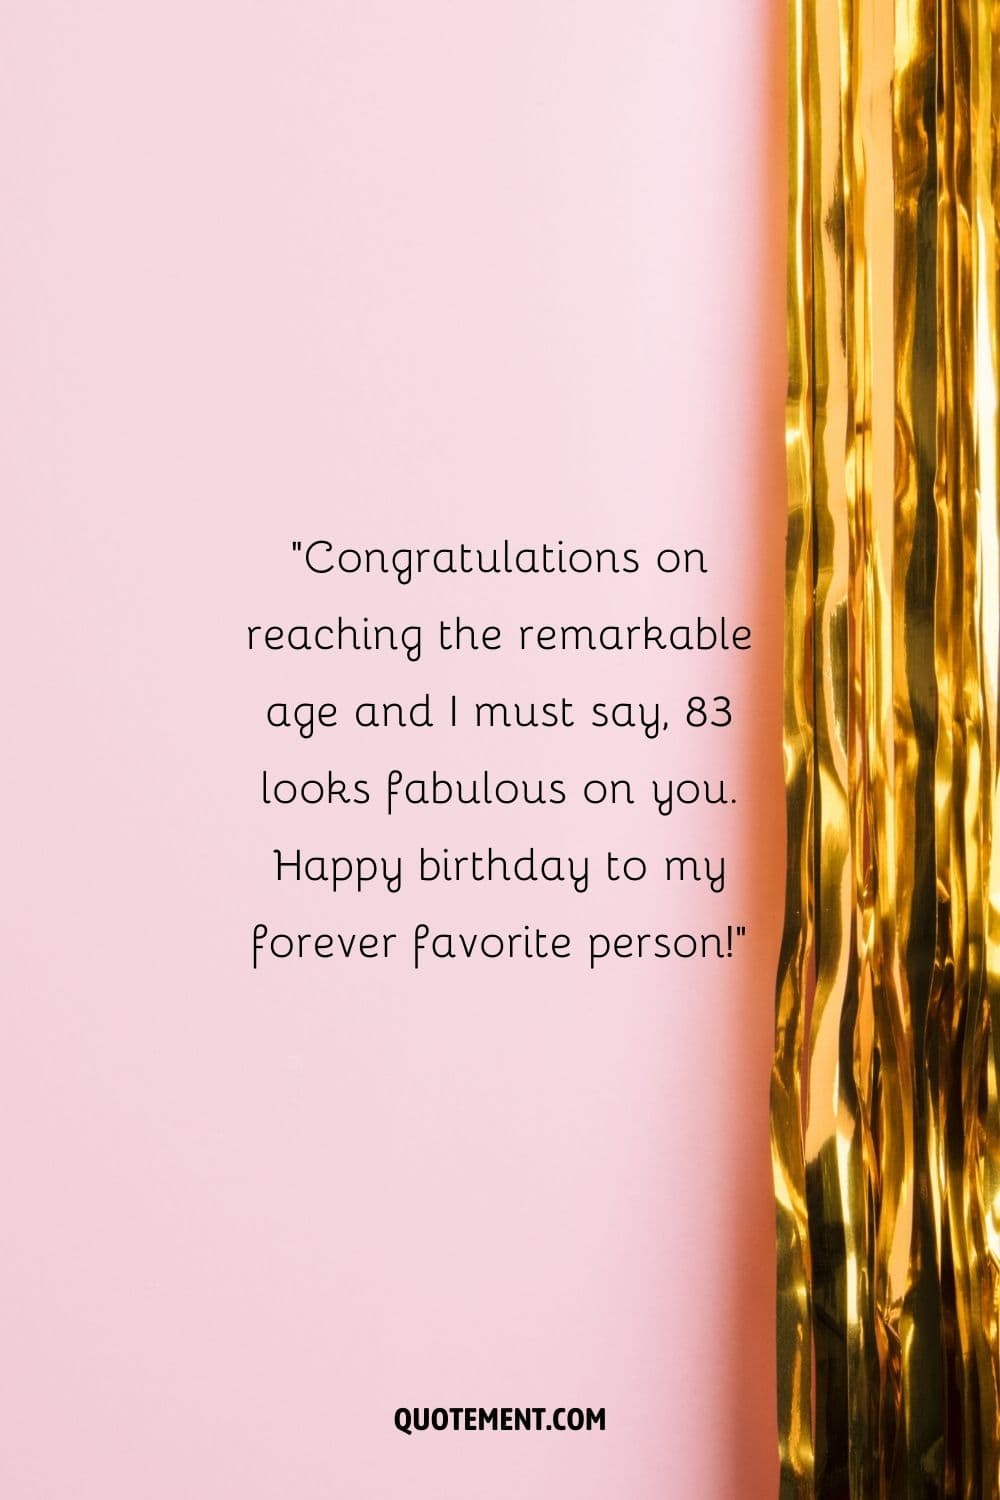 golden wrapping paper on a delicate pink background representing a unique happy 83rd birthday wish
